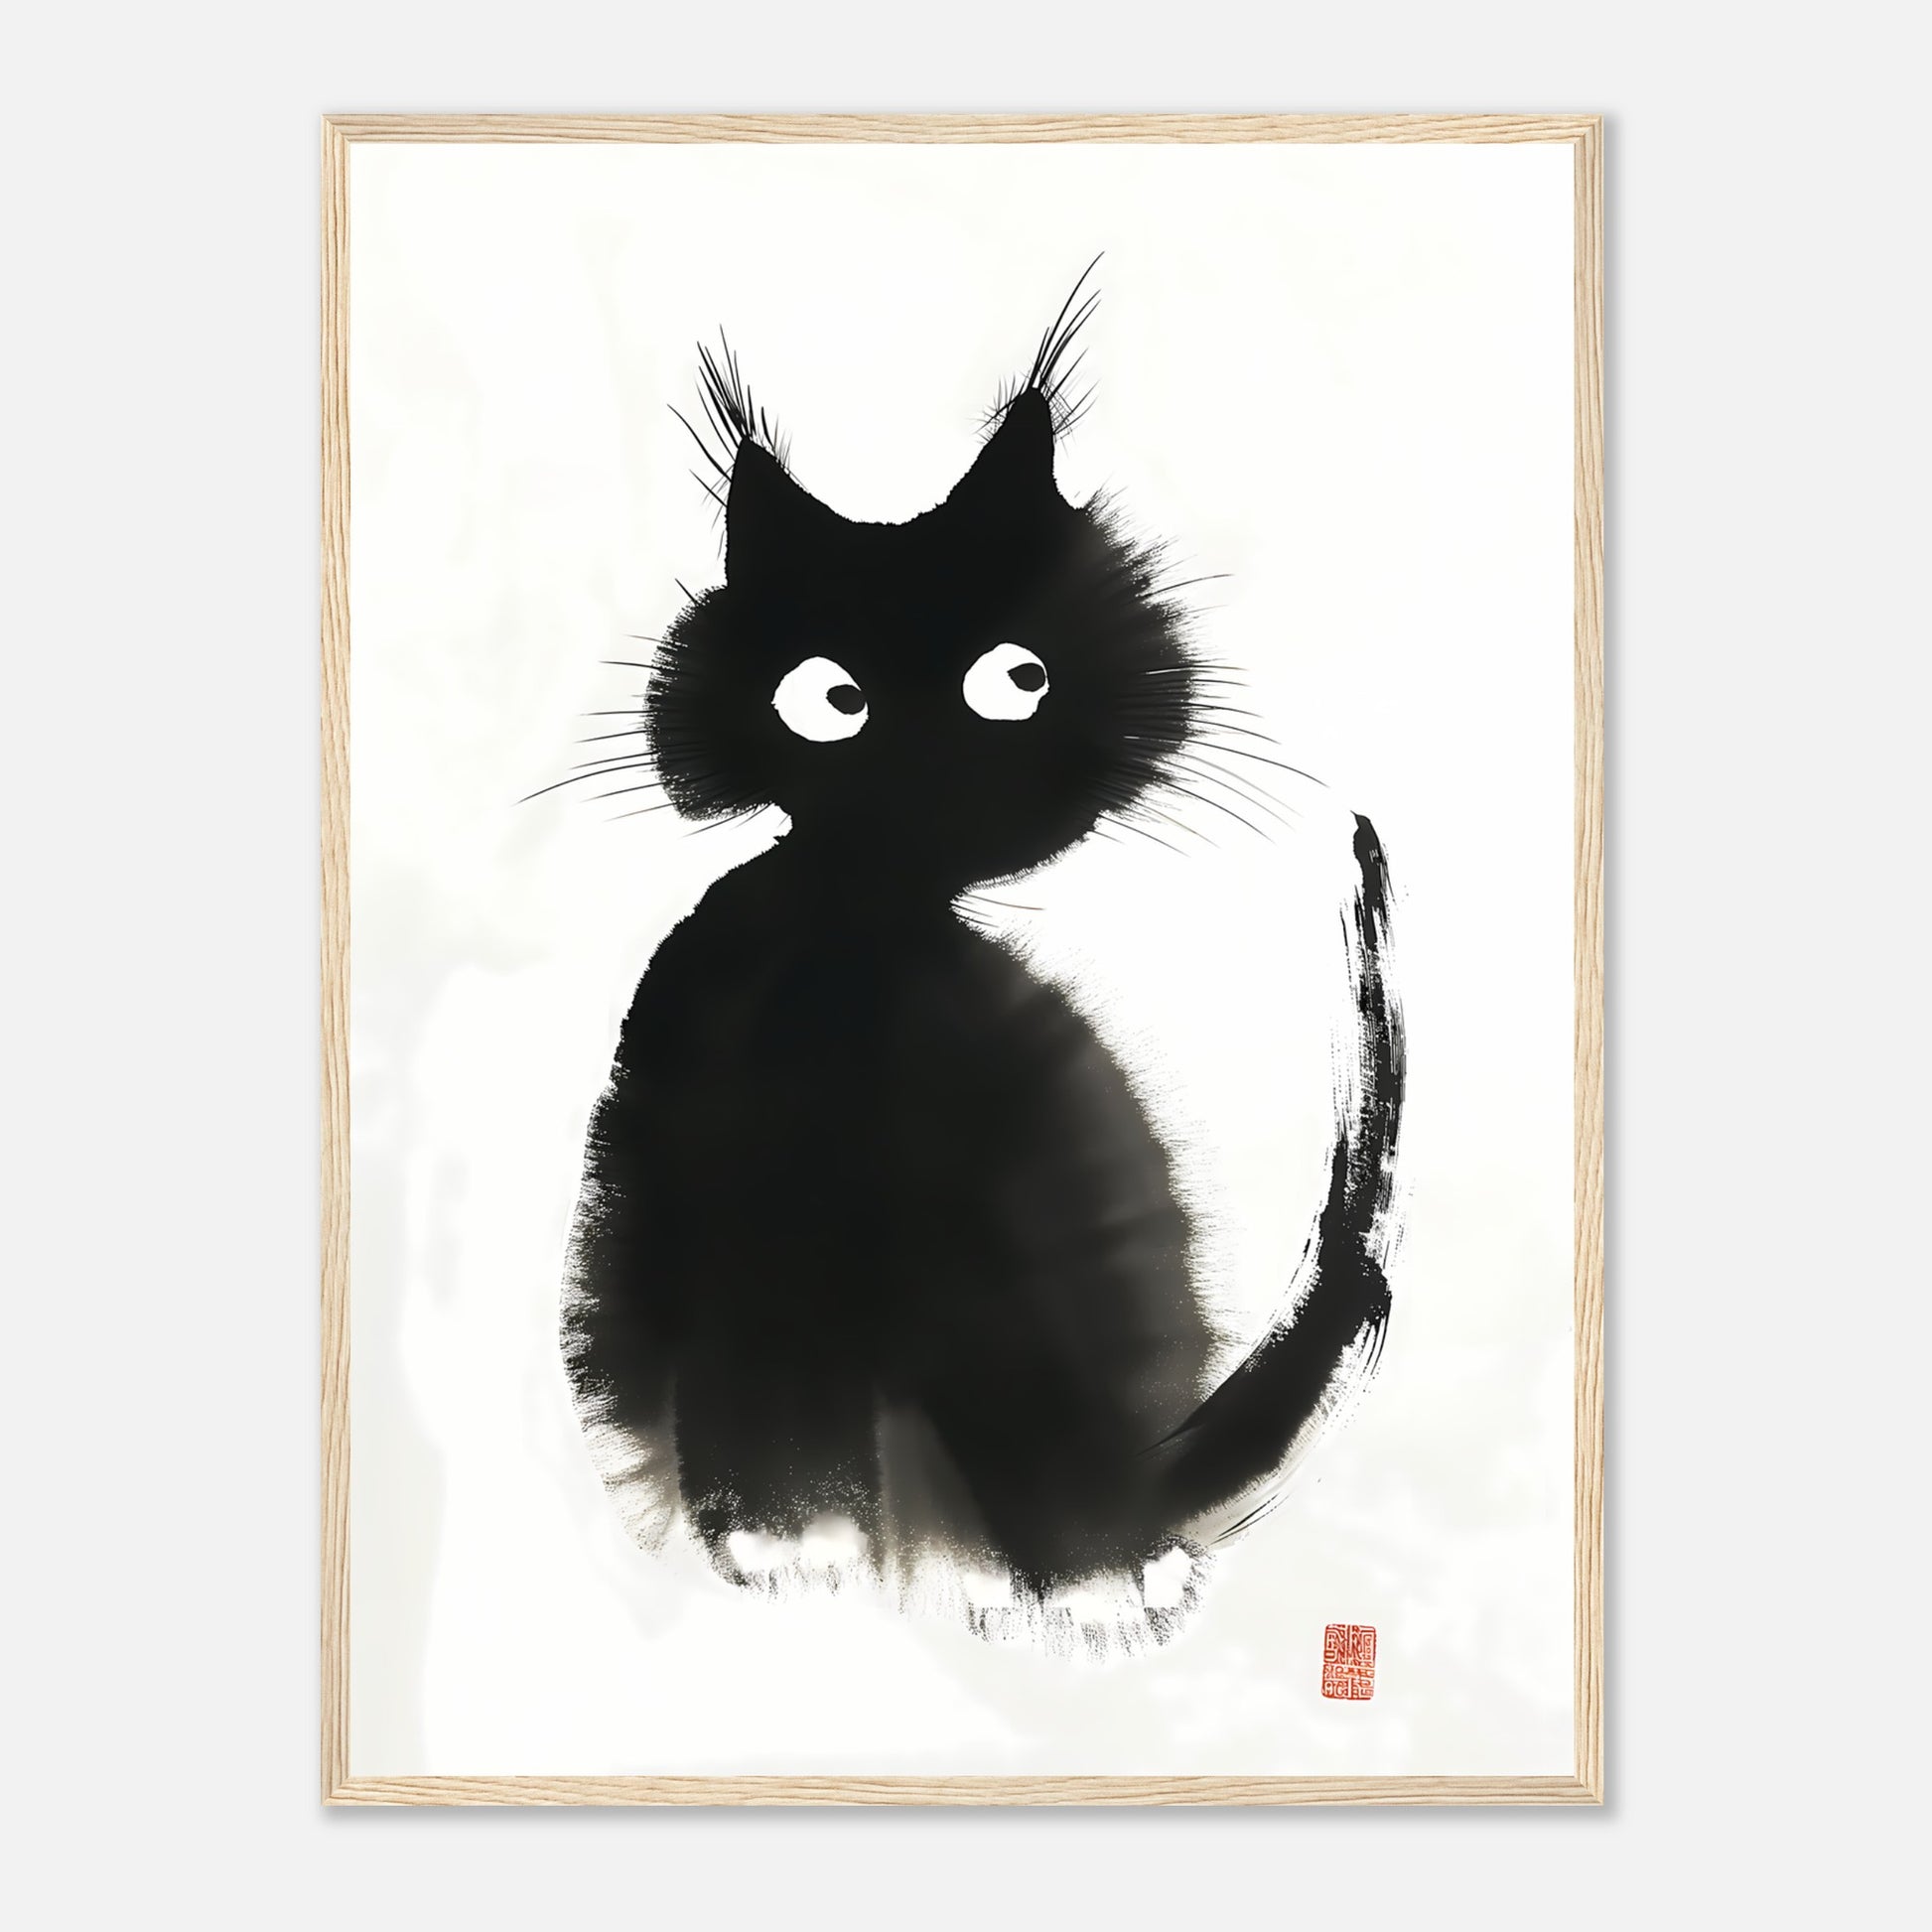 A framed artwork of a stylized black cat with large eyes and abstract fur details.